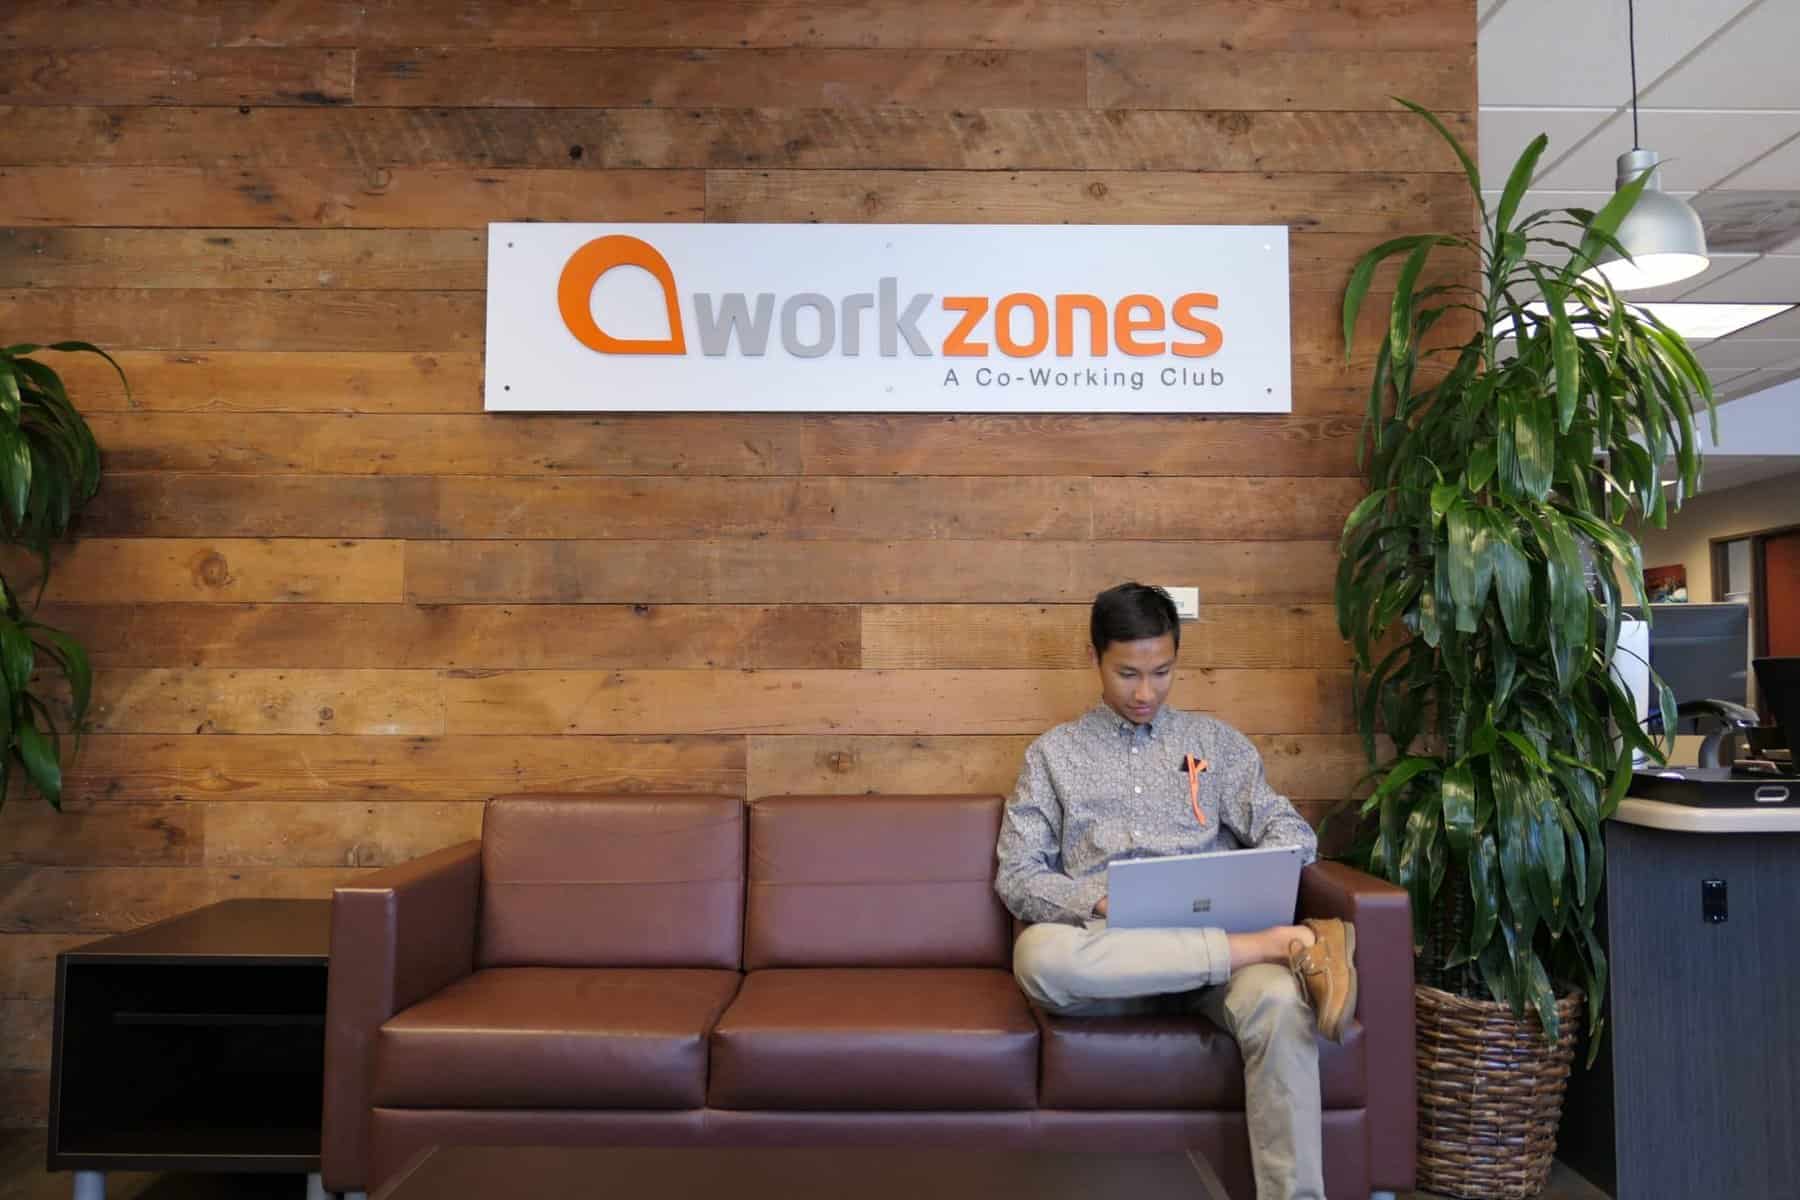 Person working on laptop below workzones sign